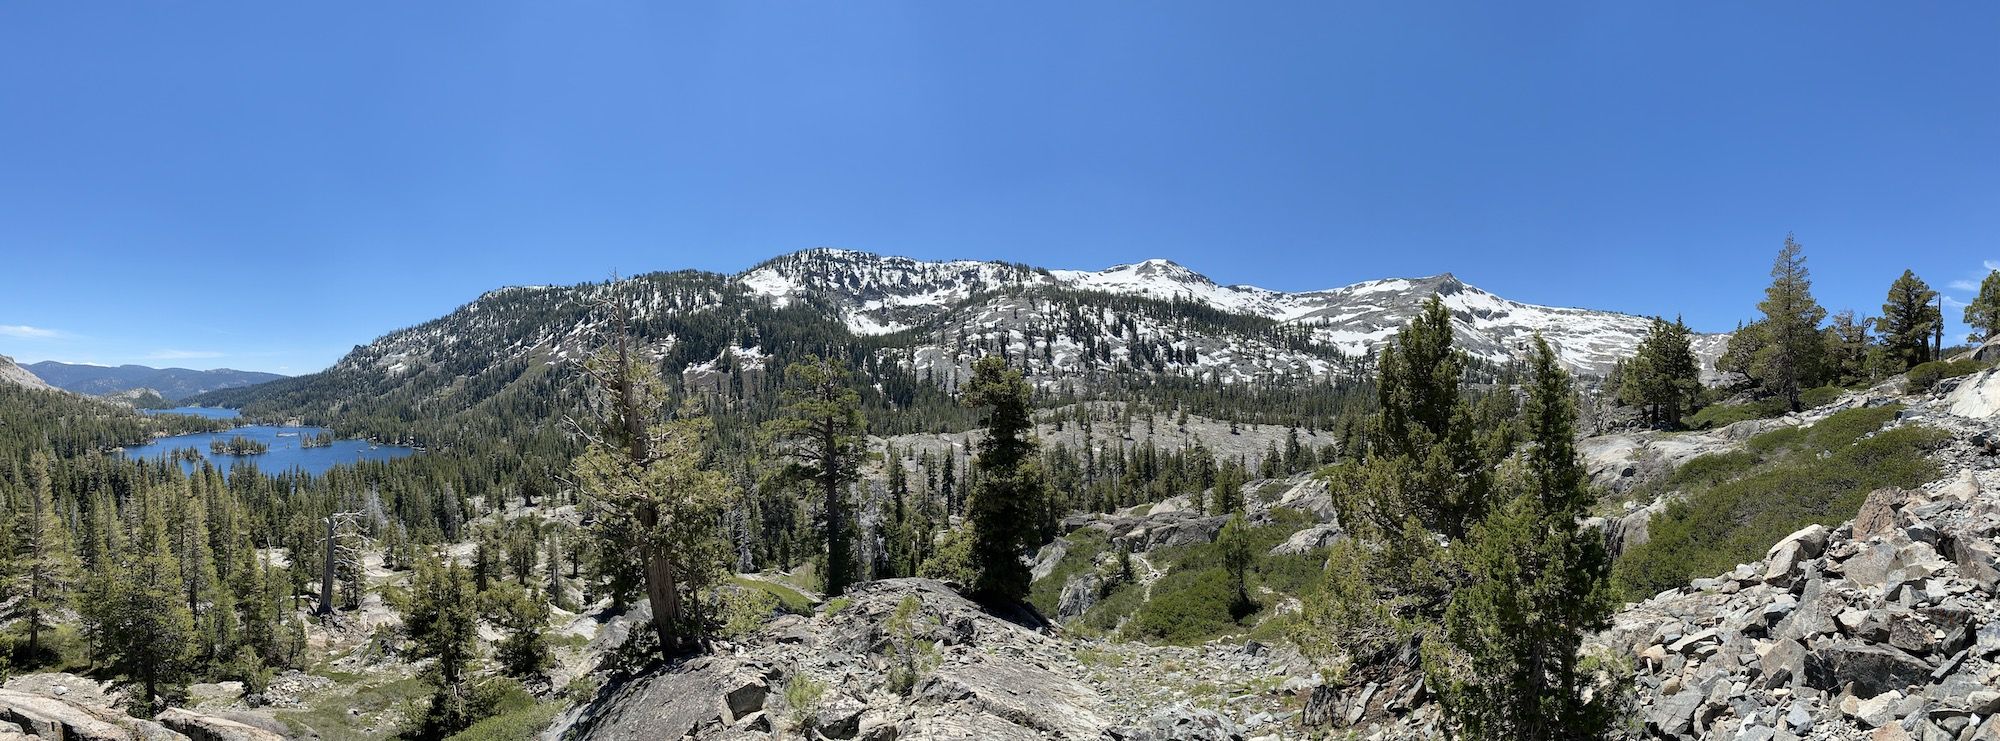 A panorama view of Echo lakes and mountains with snow